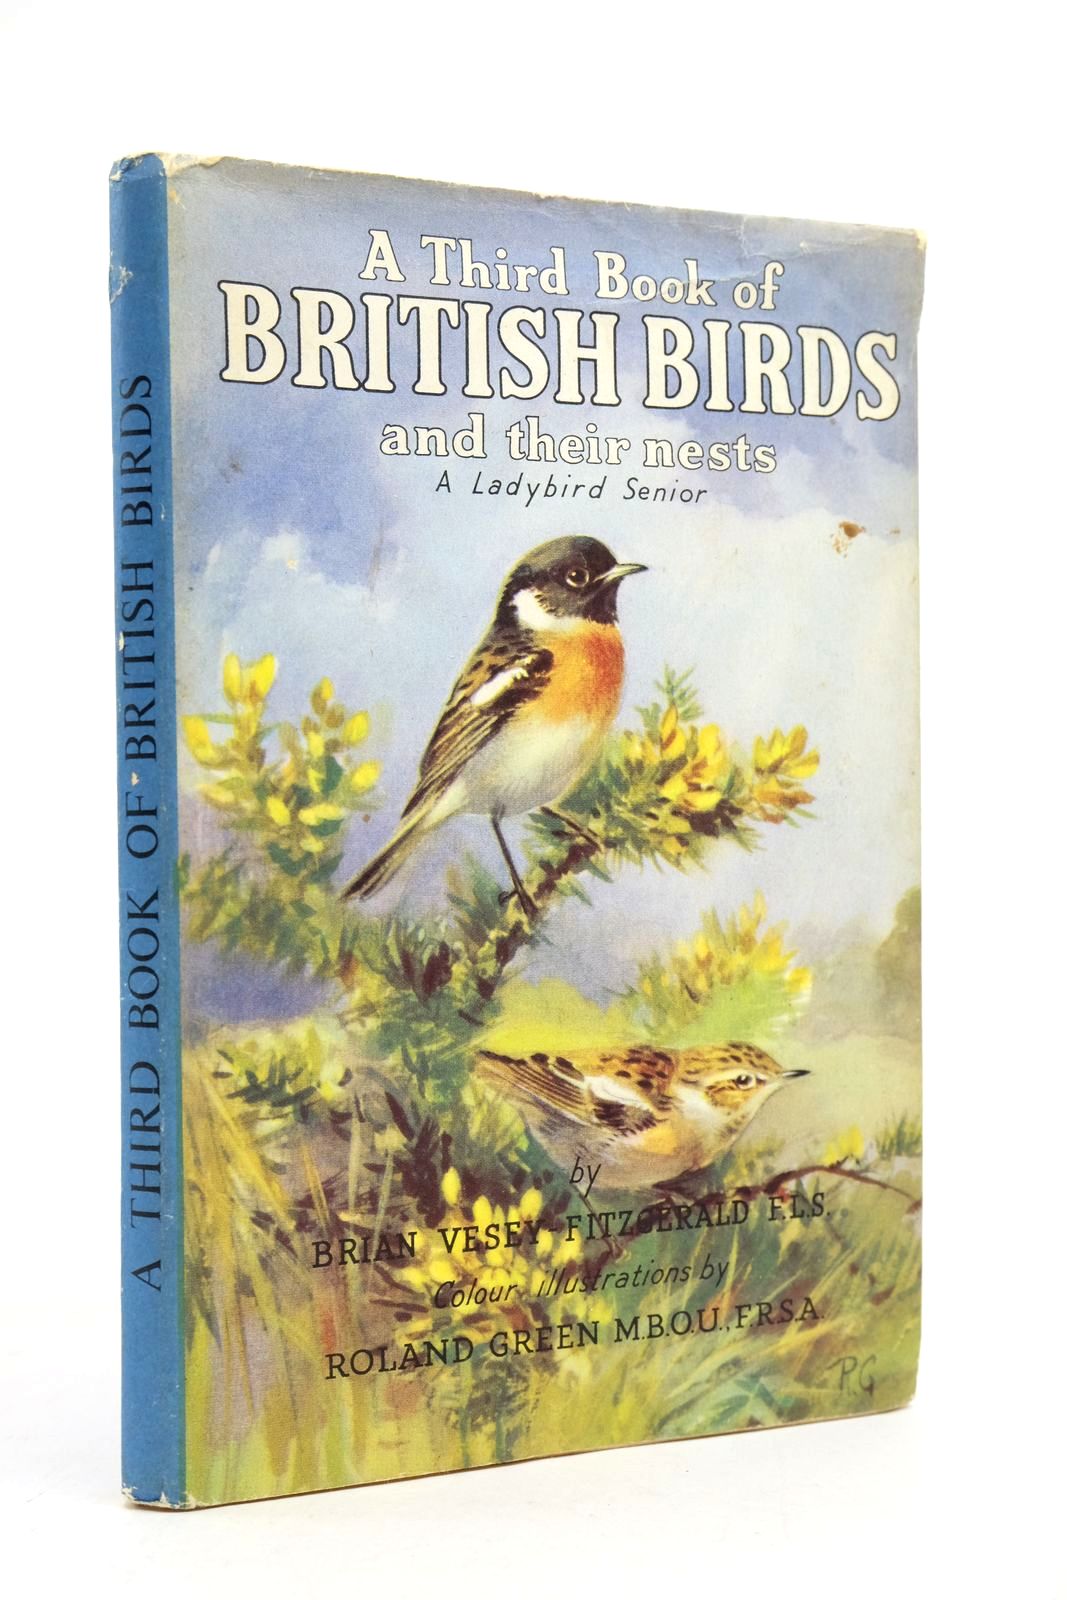 Photo of A THIRD BOOK OF BRITISH BIRDS AND THEIR NESTS written by Vesey-Fitzgerald, Brian illustrated by Green, Roland published by Wills &amp; Hepworth Ltd. (STOCK CODE: 2139705)  for sale by Stella & Rose's Books